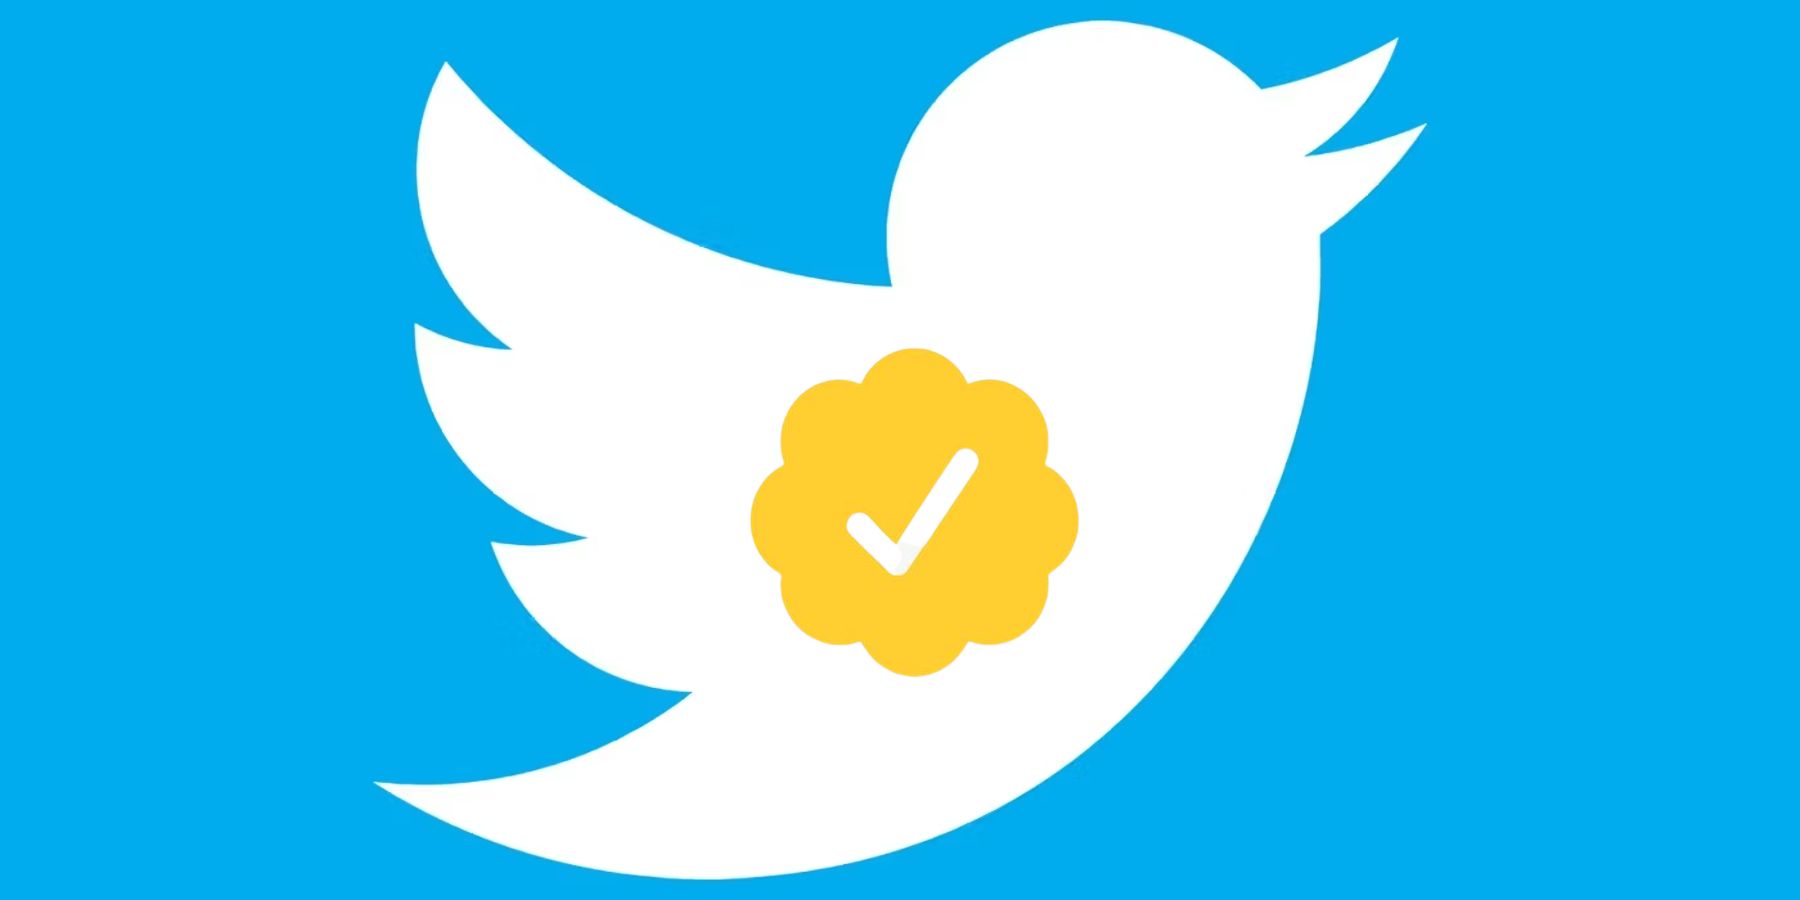 twitter logo with a gold checkmark